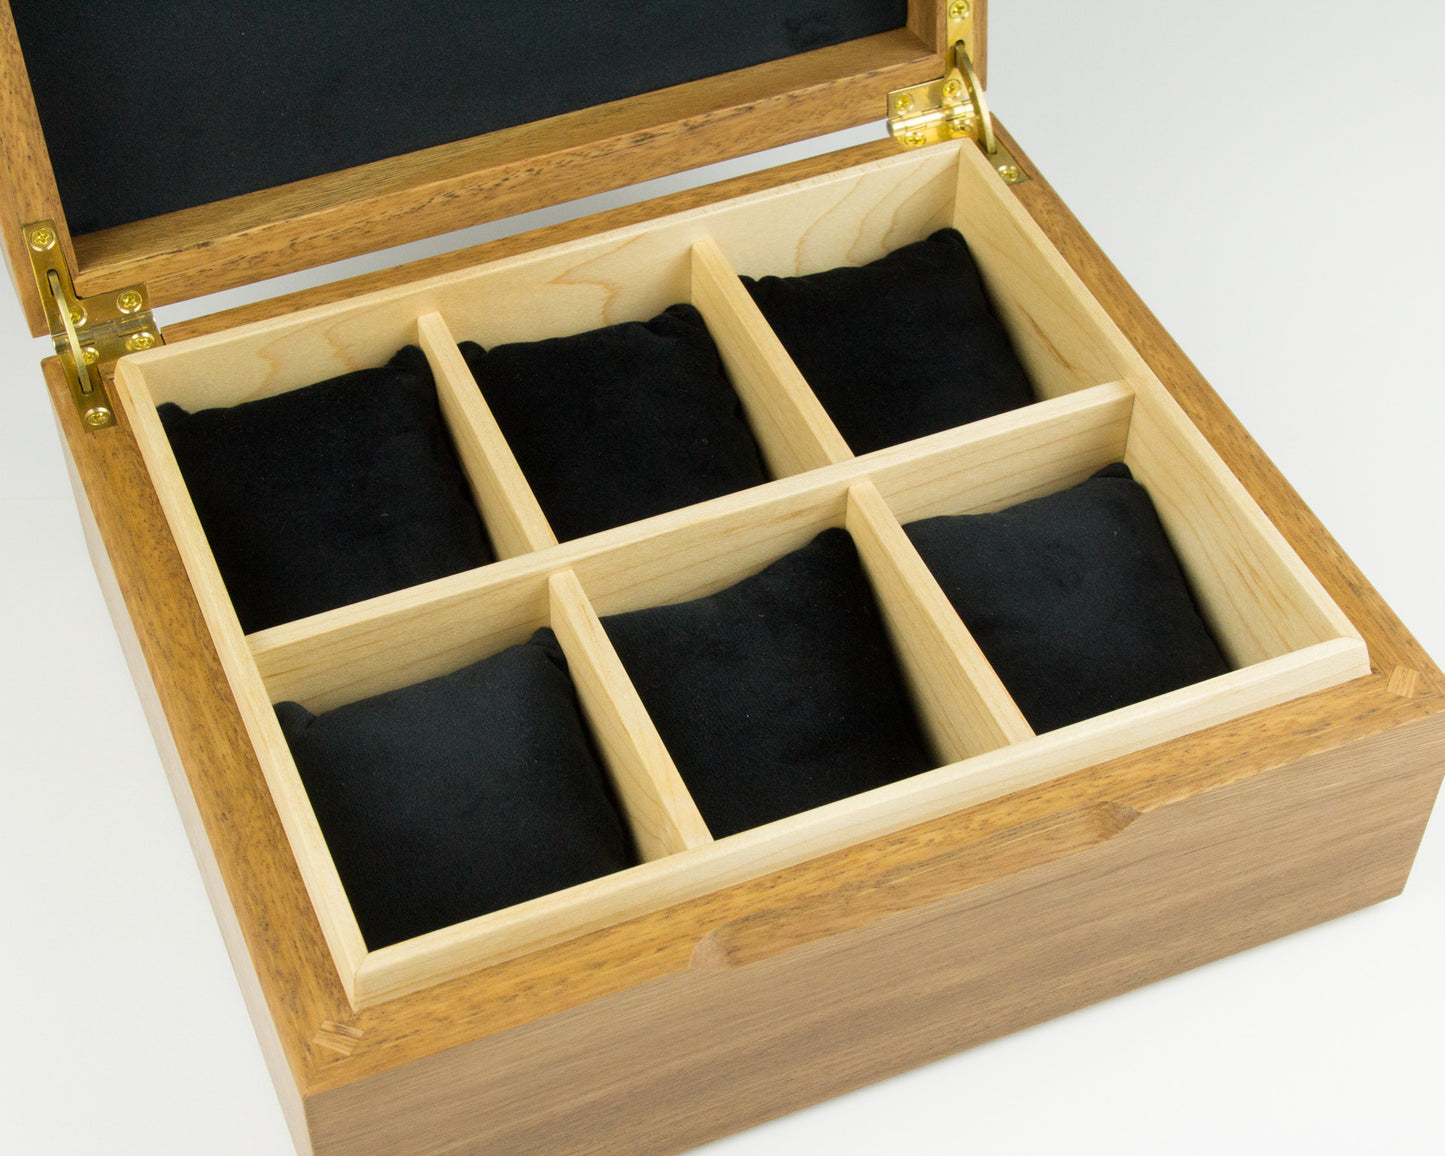 Watch box handcrafted from Spotted Gum